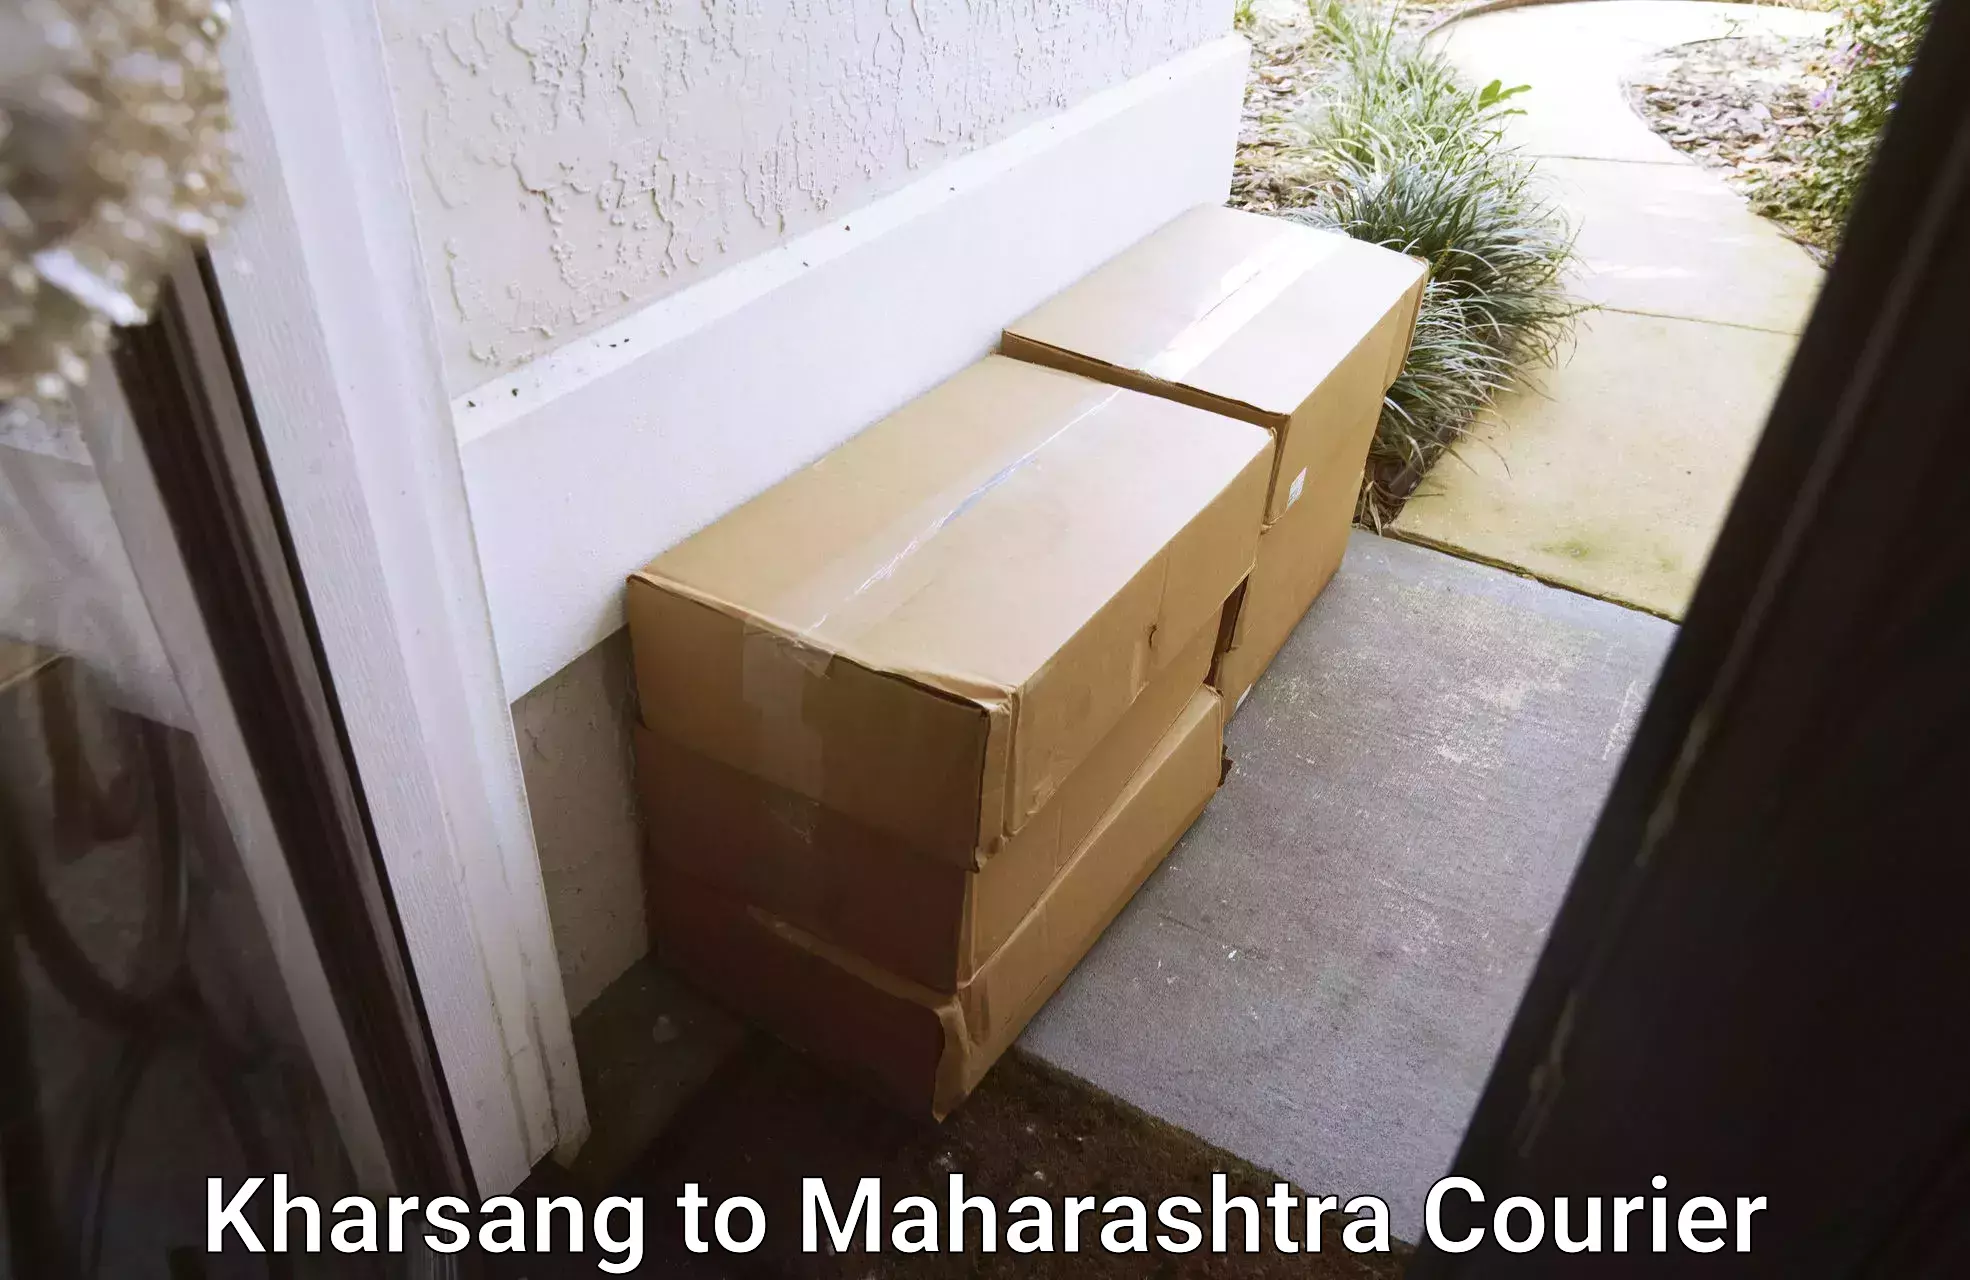 High-quality delivery services Kharsang to Khandala Pune